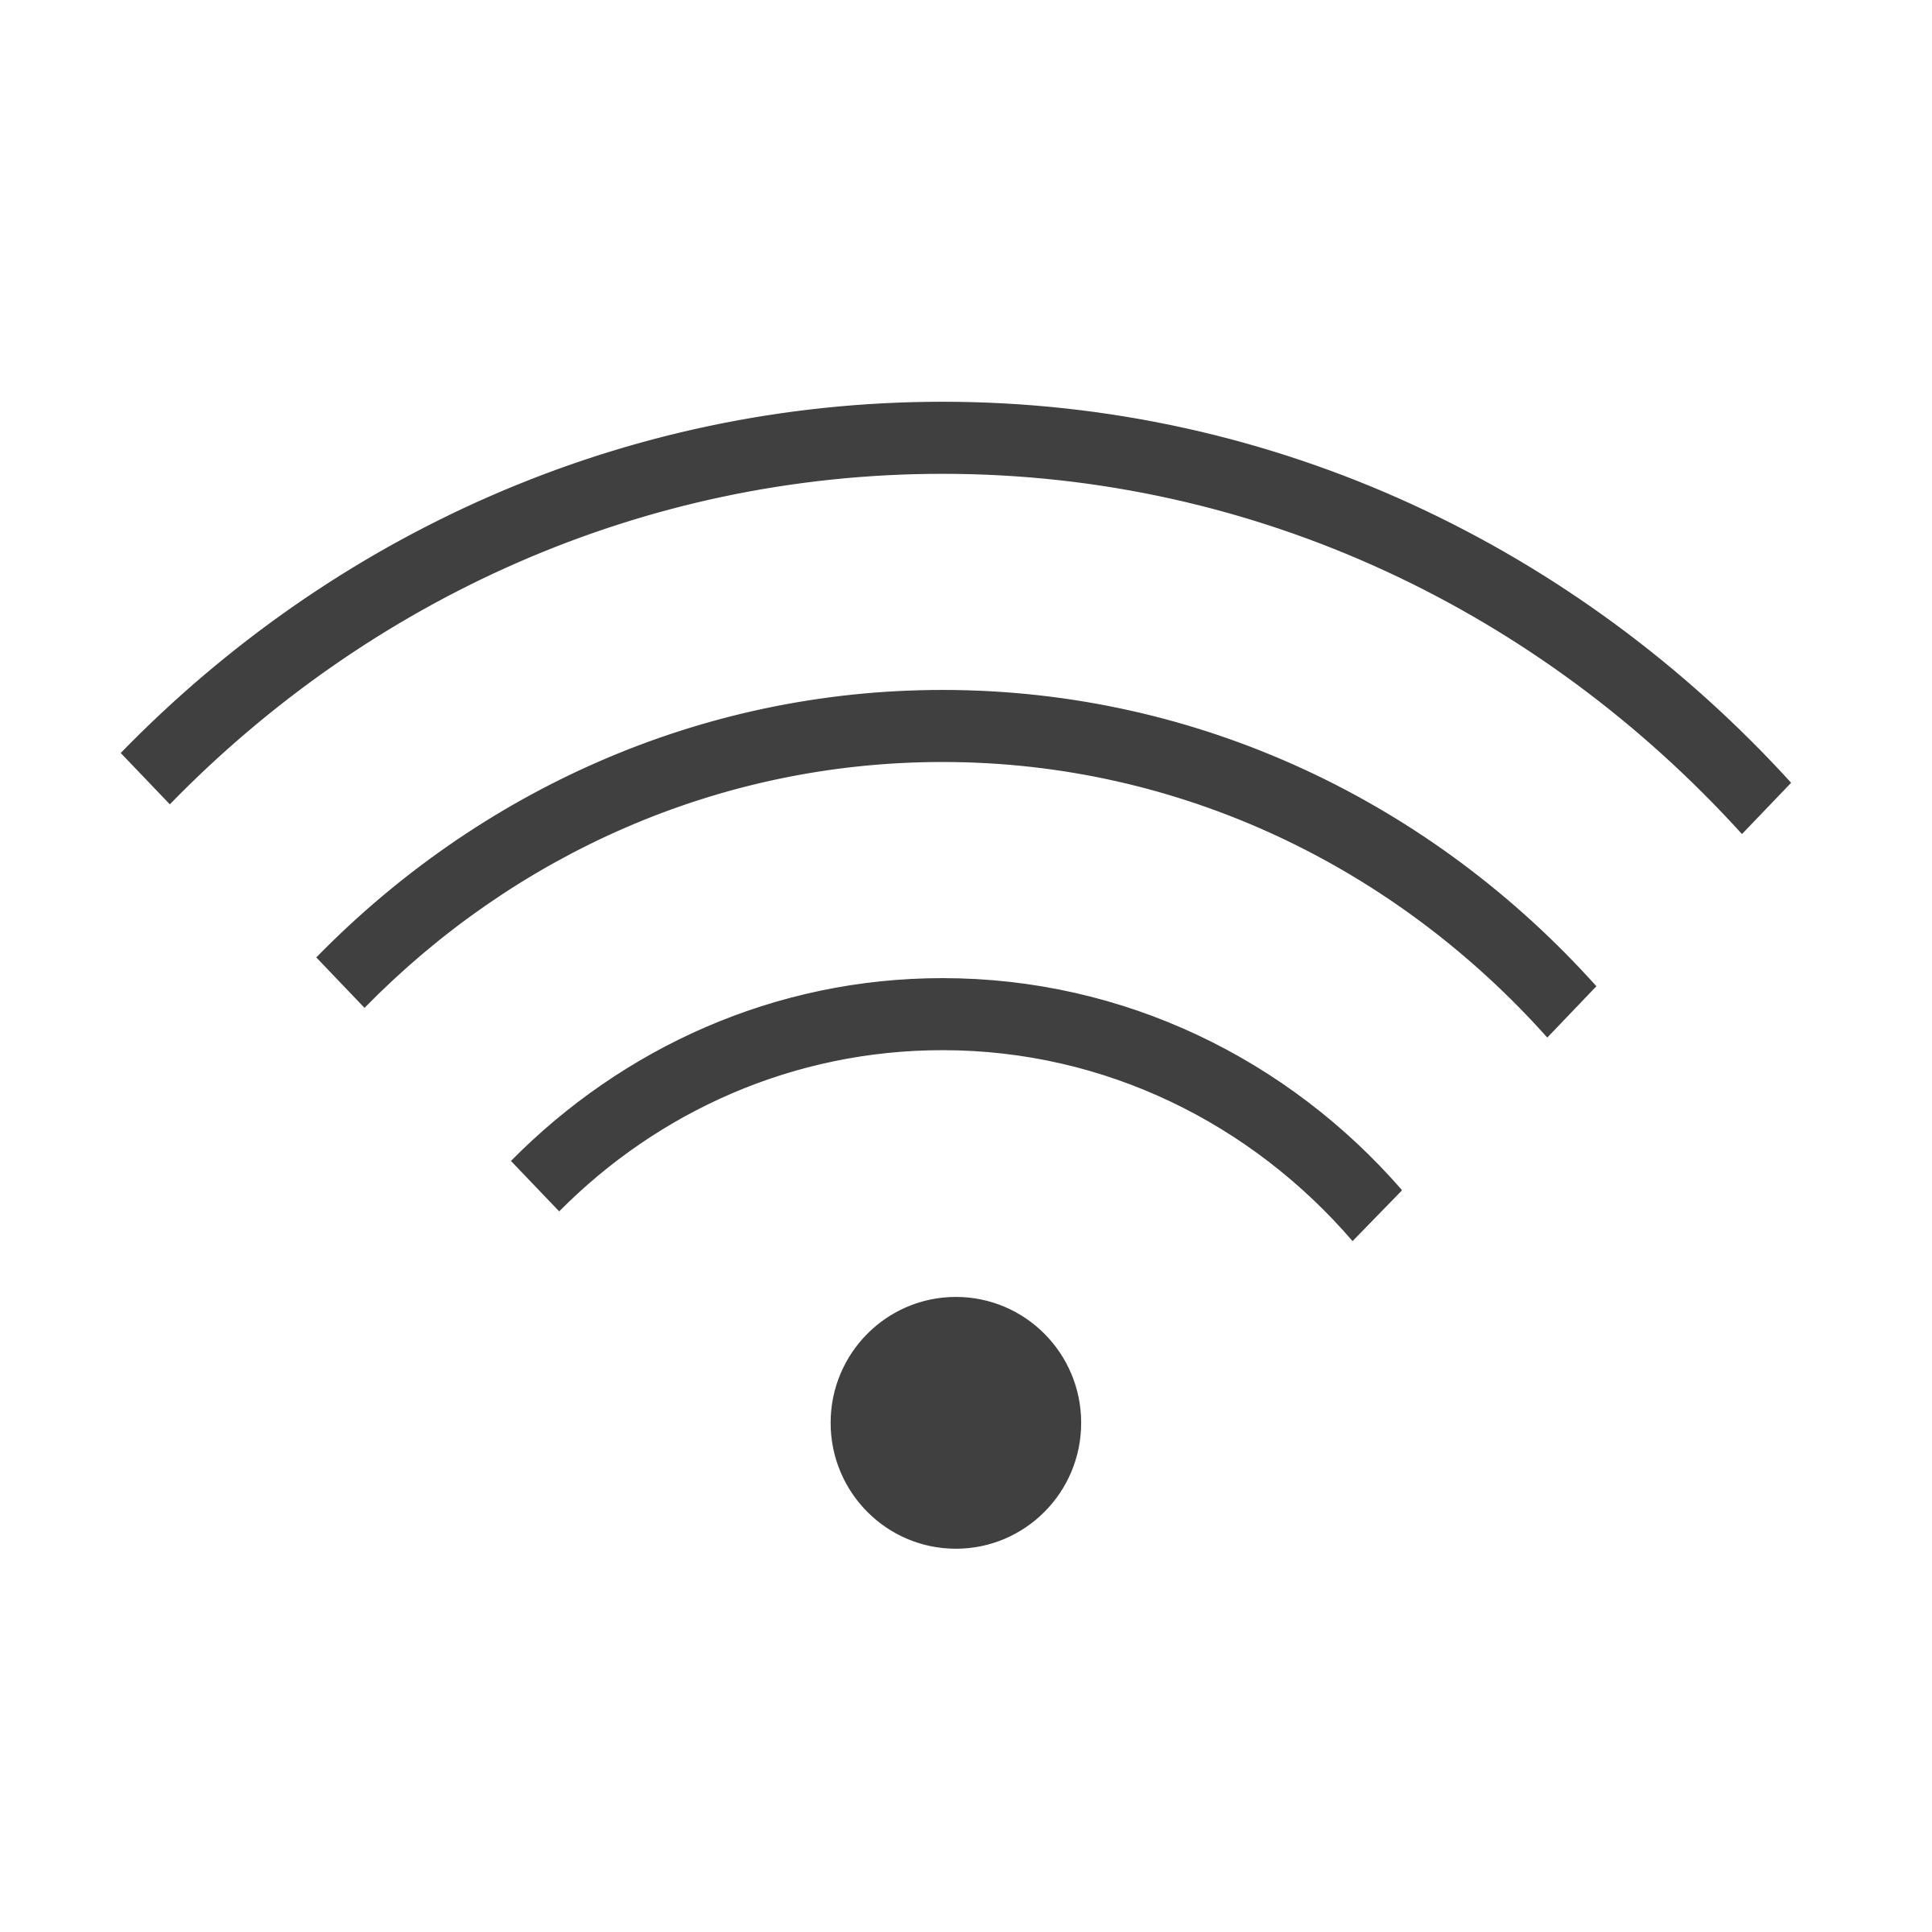 Wifi clipart black and white